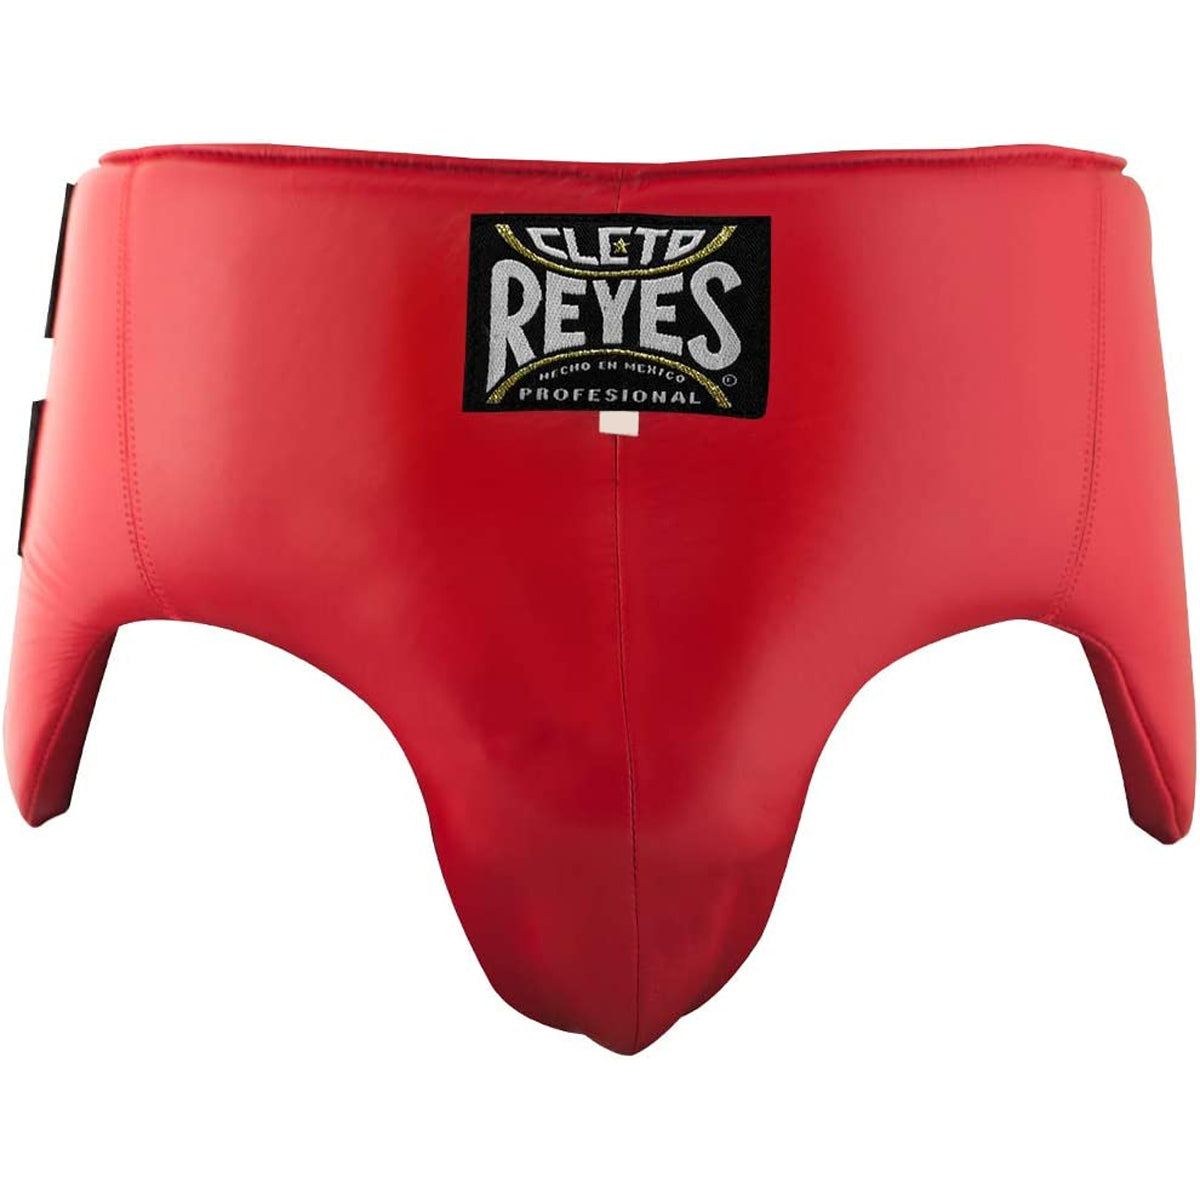 Cleto Reyes Kidney and Foul Padded Protective Cup - Large (36-38") - Red Cleto Reyes